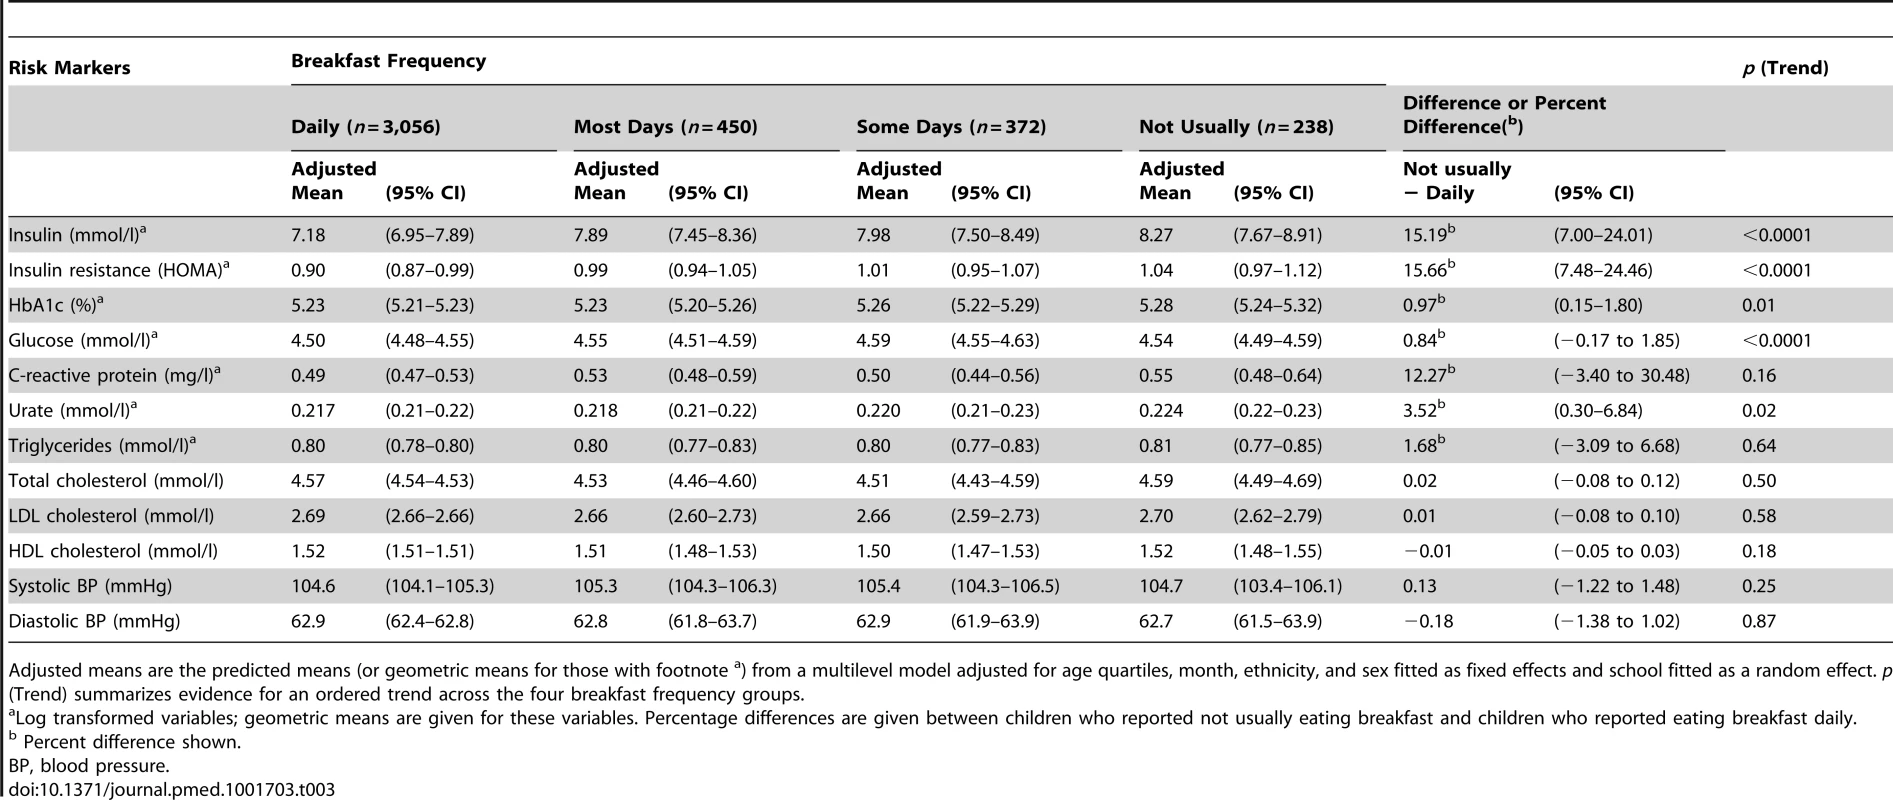 Means (geometric means) and differences (percent differences) in type 2 diabetes and cardiovascular risk markers by breakfast frequency in 4,116 study participants: adjusted for adiposity markers.